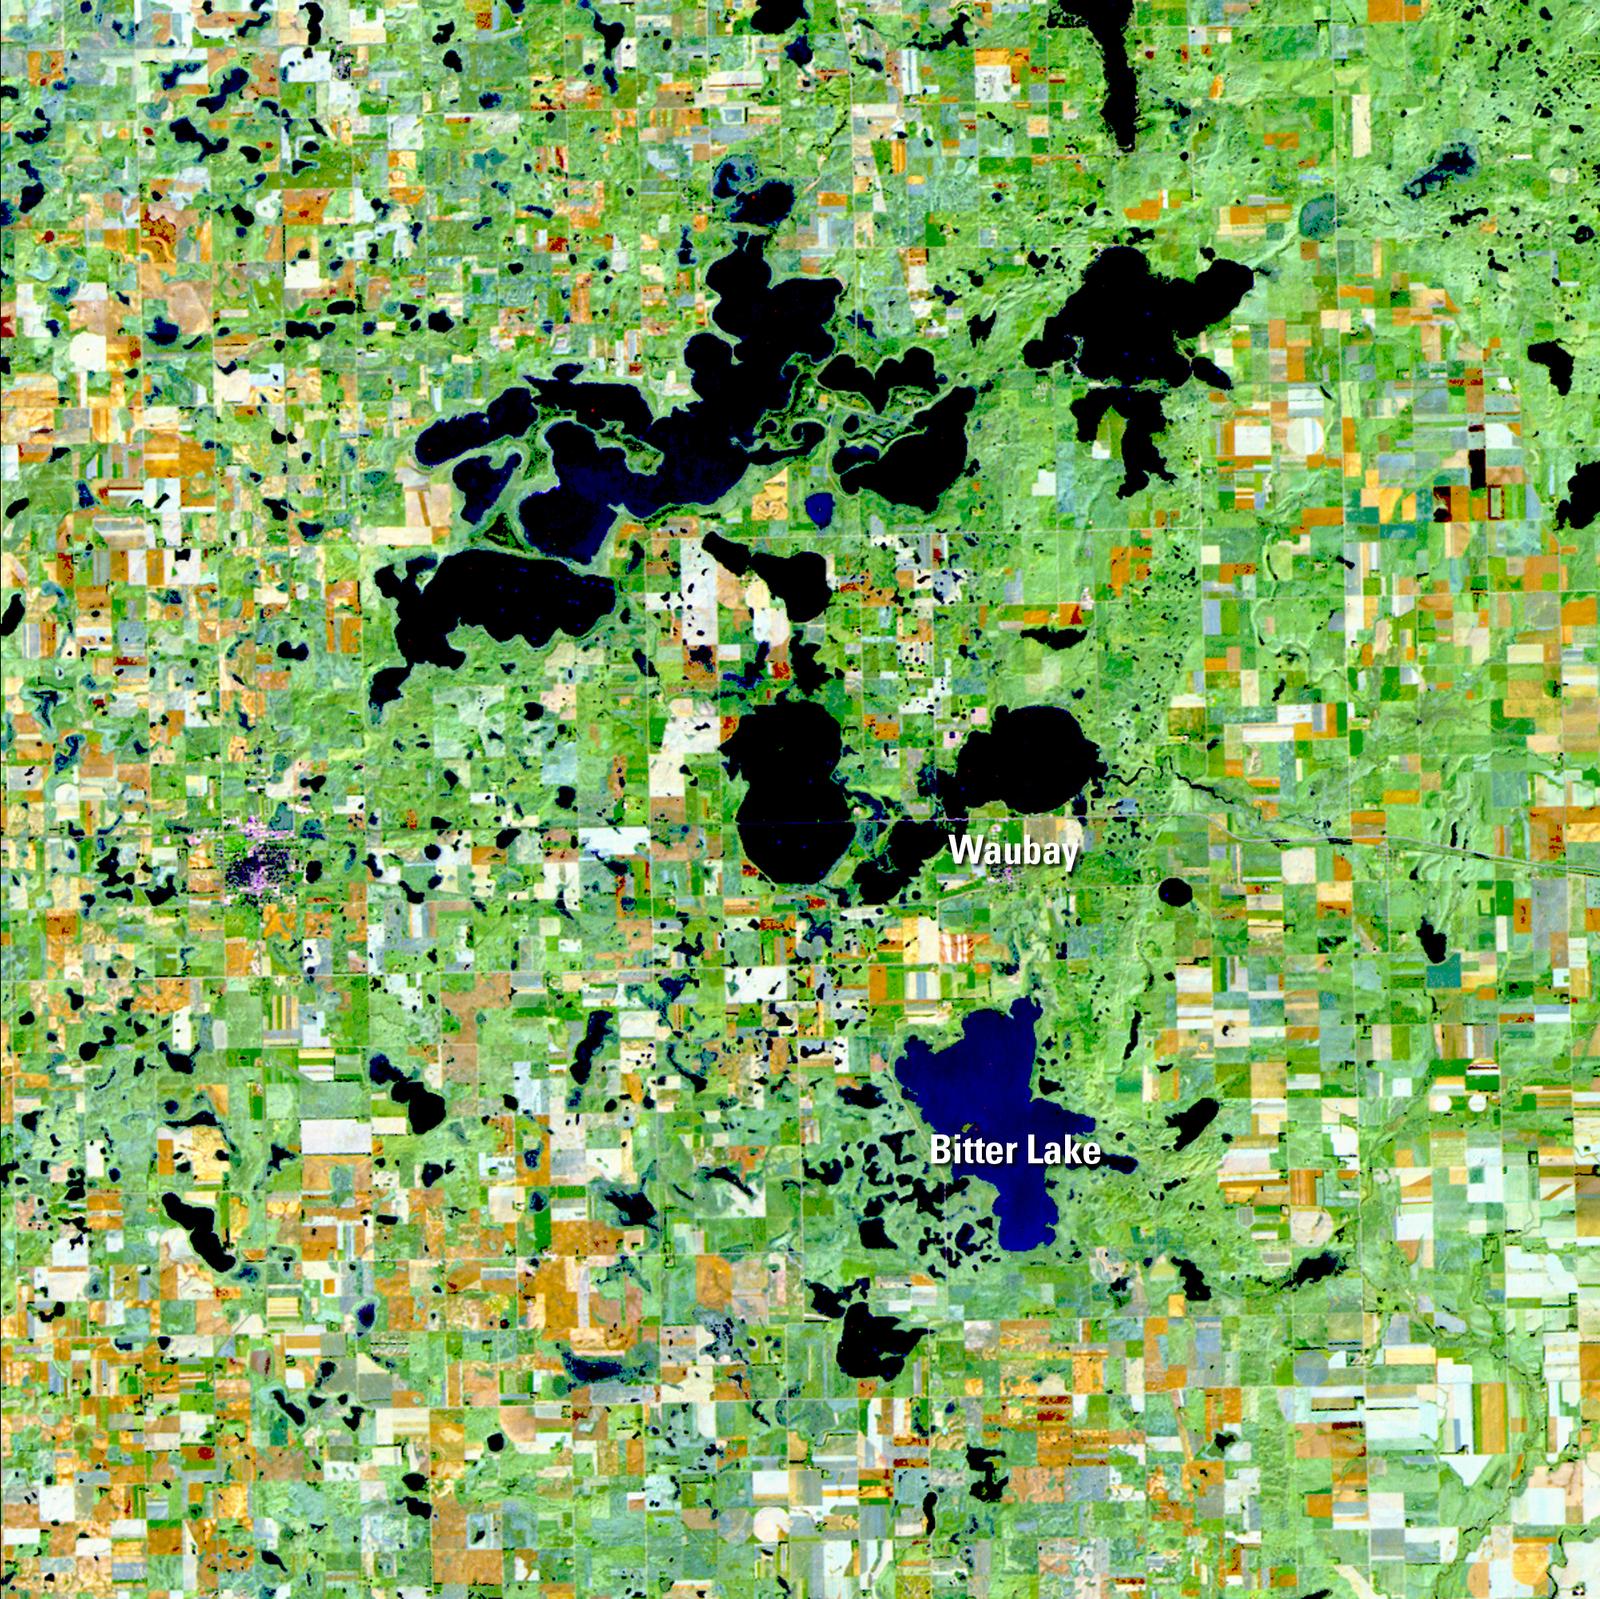 Image of the Week - Lakes of Eastern Day County, South Dakota